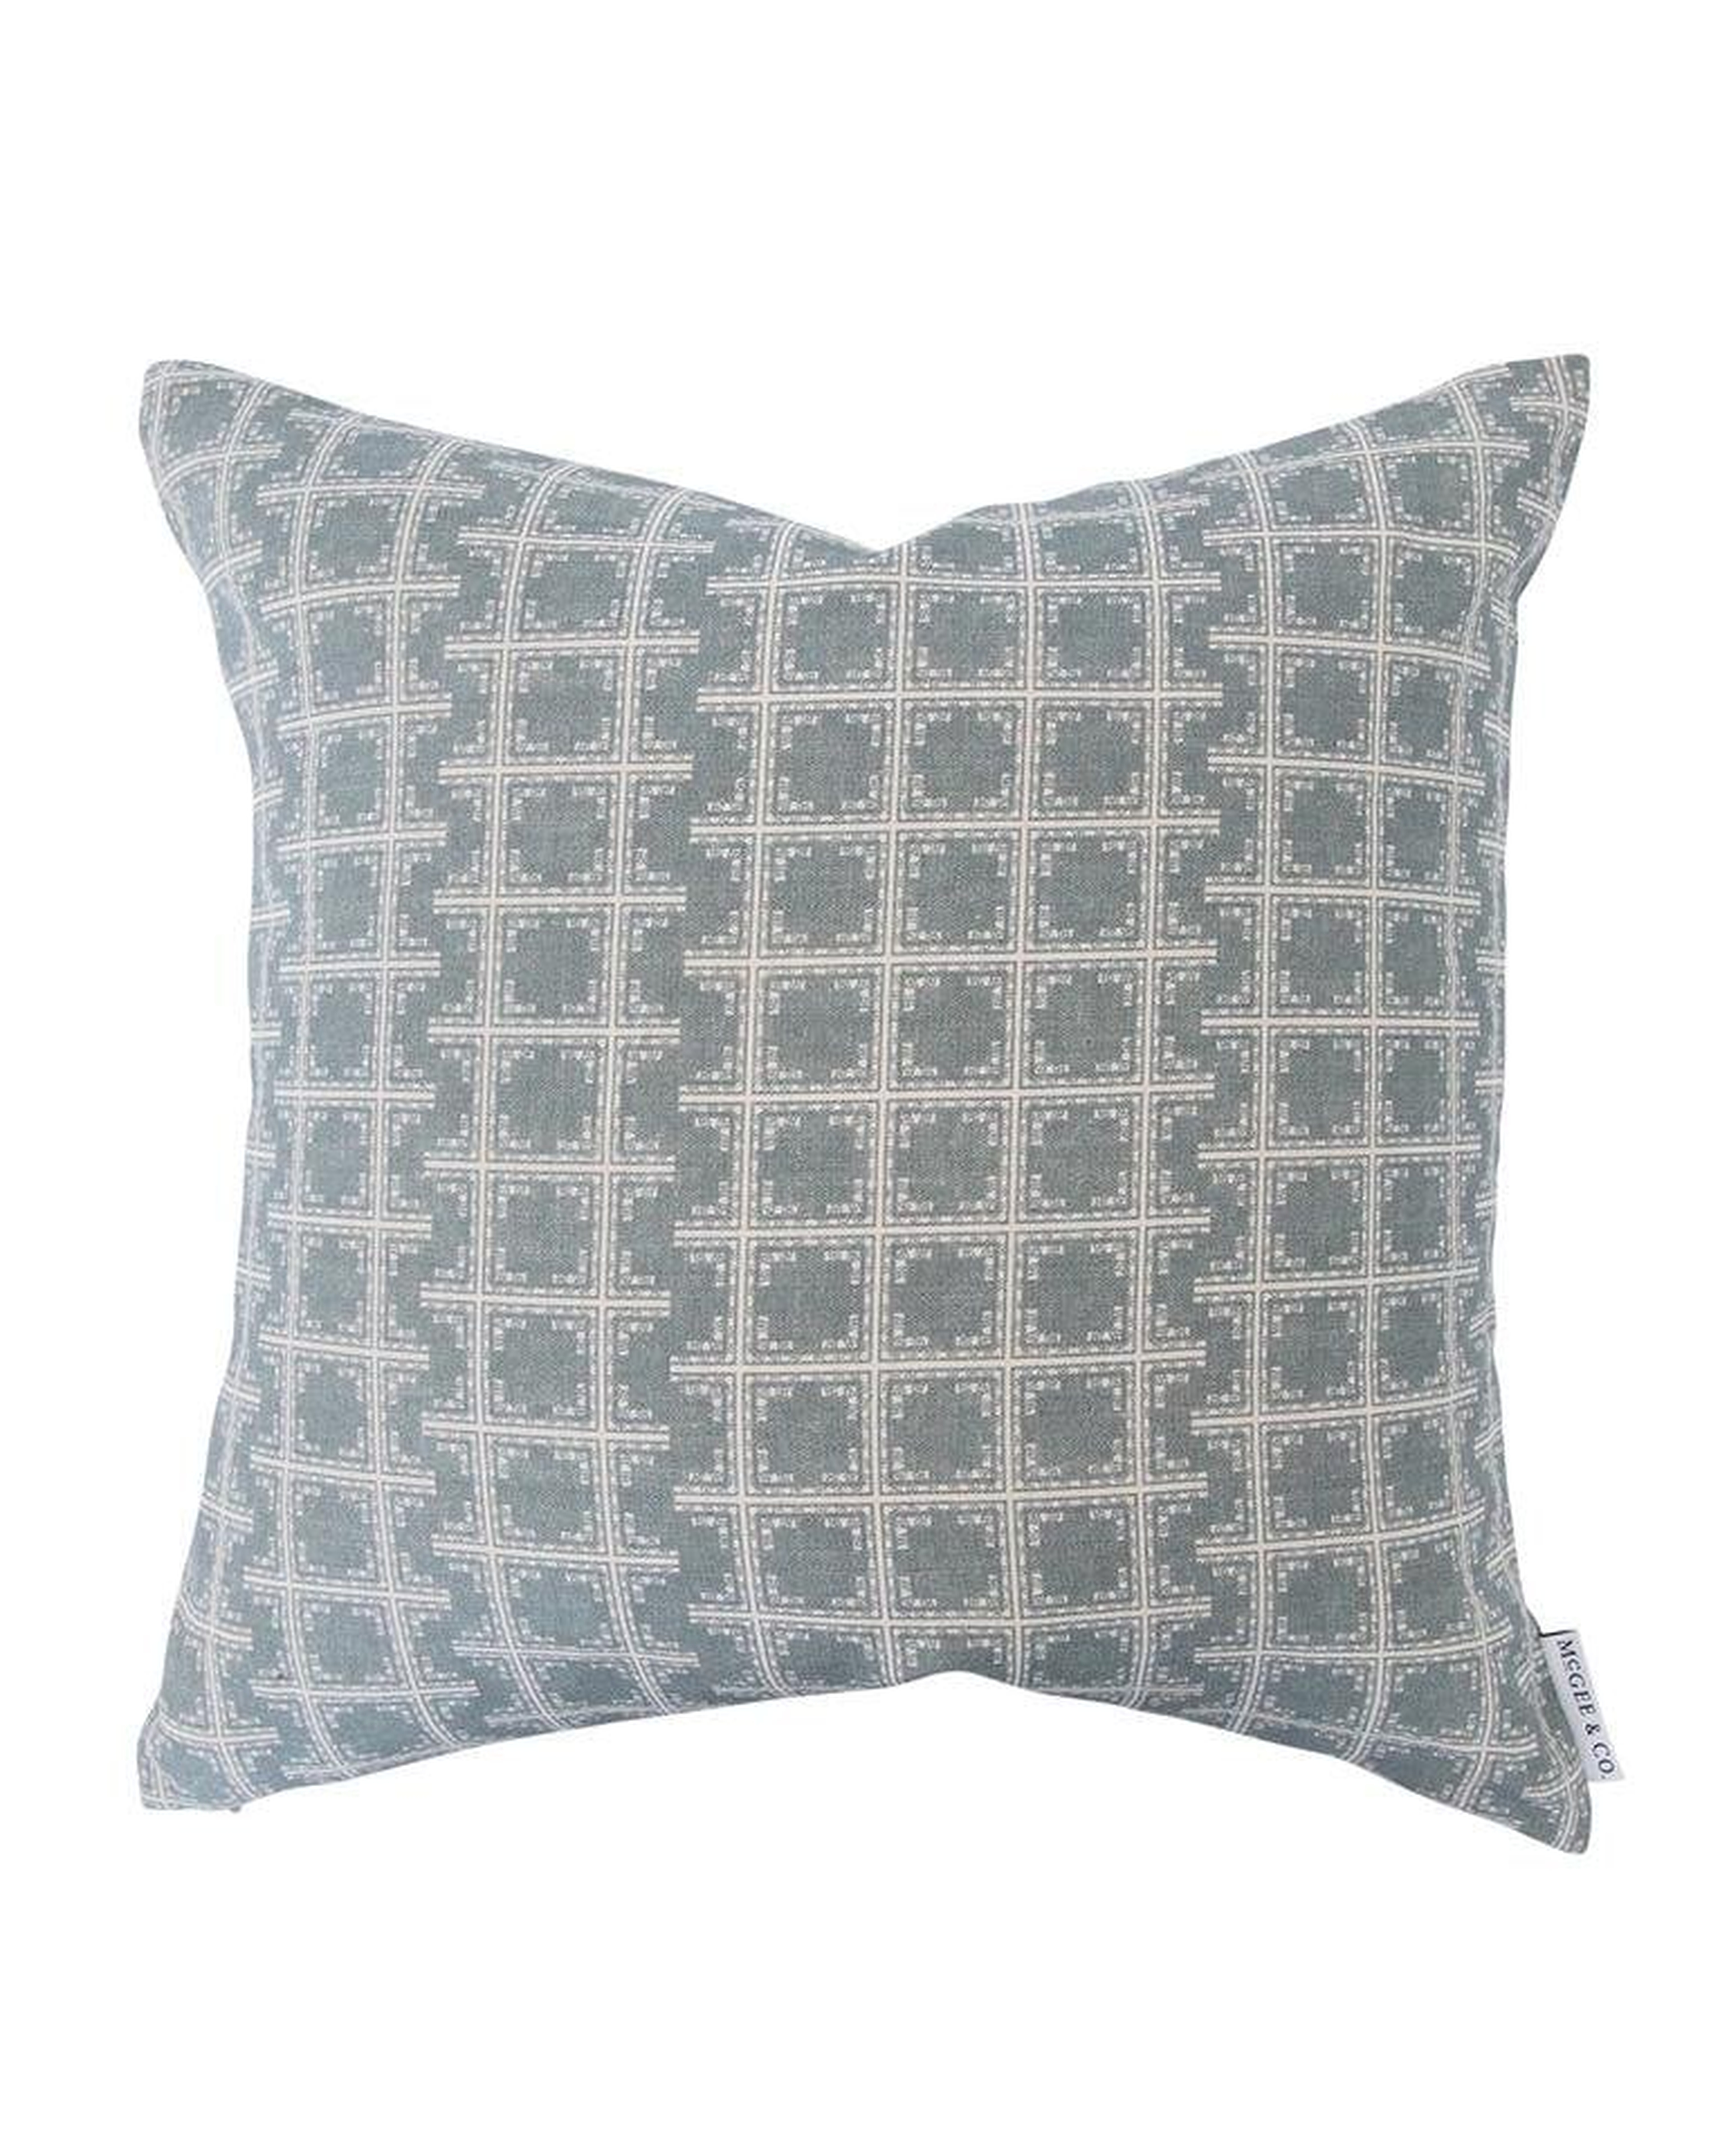 FITZ PILLOW COVER_ 20" x 20" - McGee & Co.